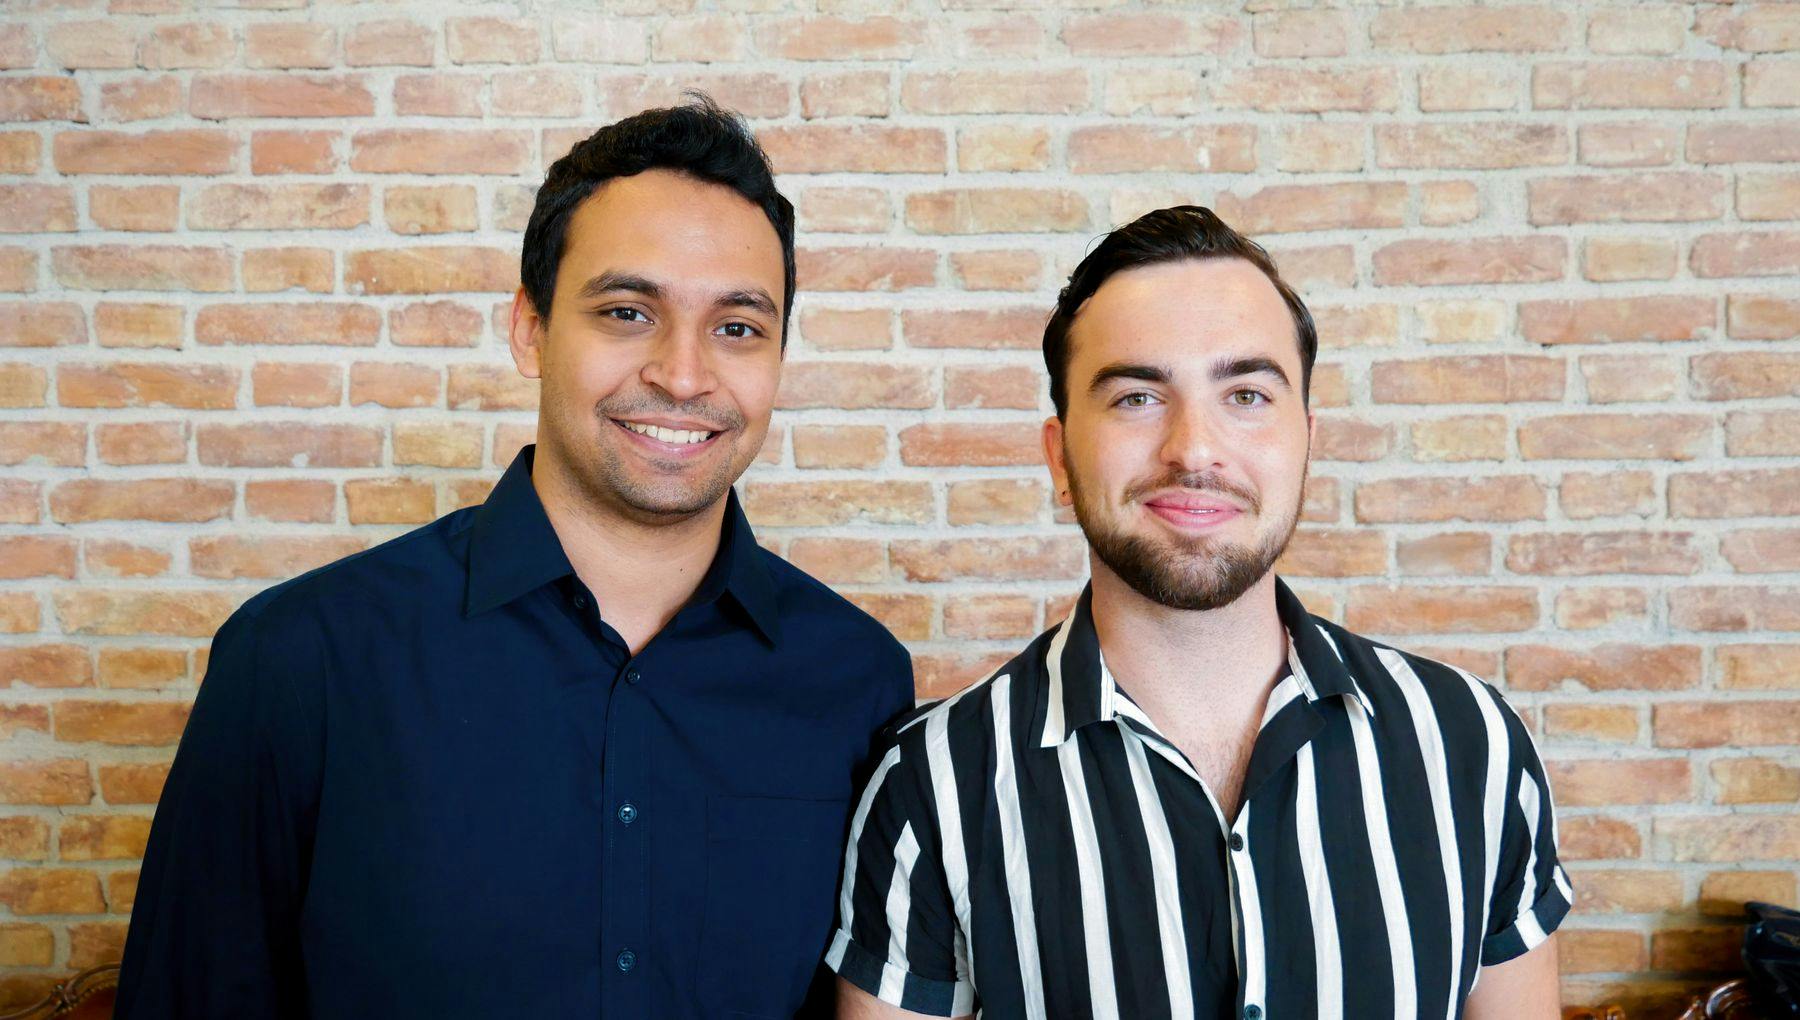 Portrait of Stavya Bhatia and Wouter Vertogen - founders of Lanced. FoundersFridays interview.